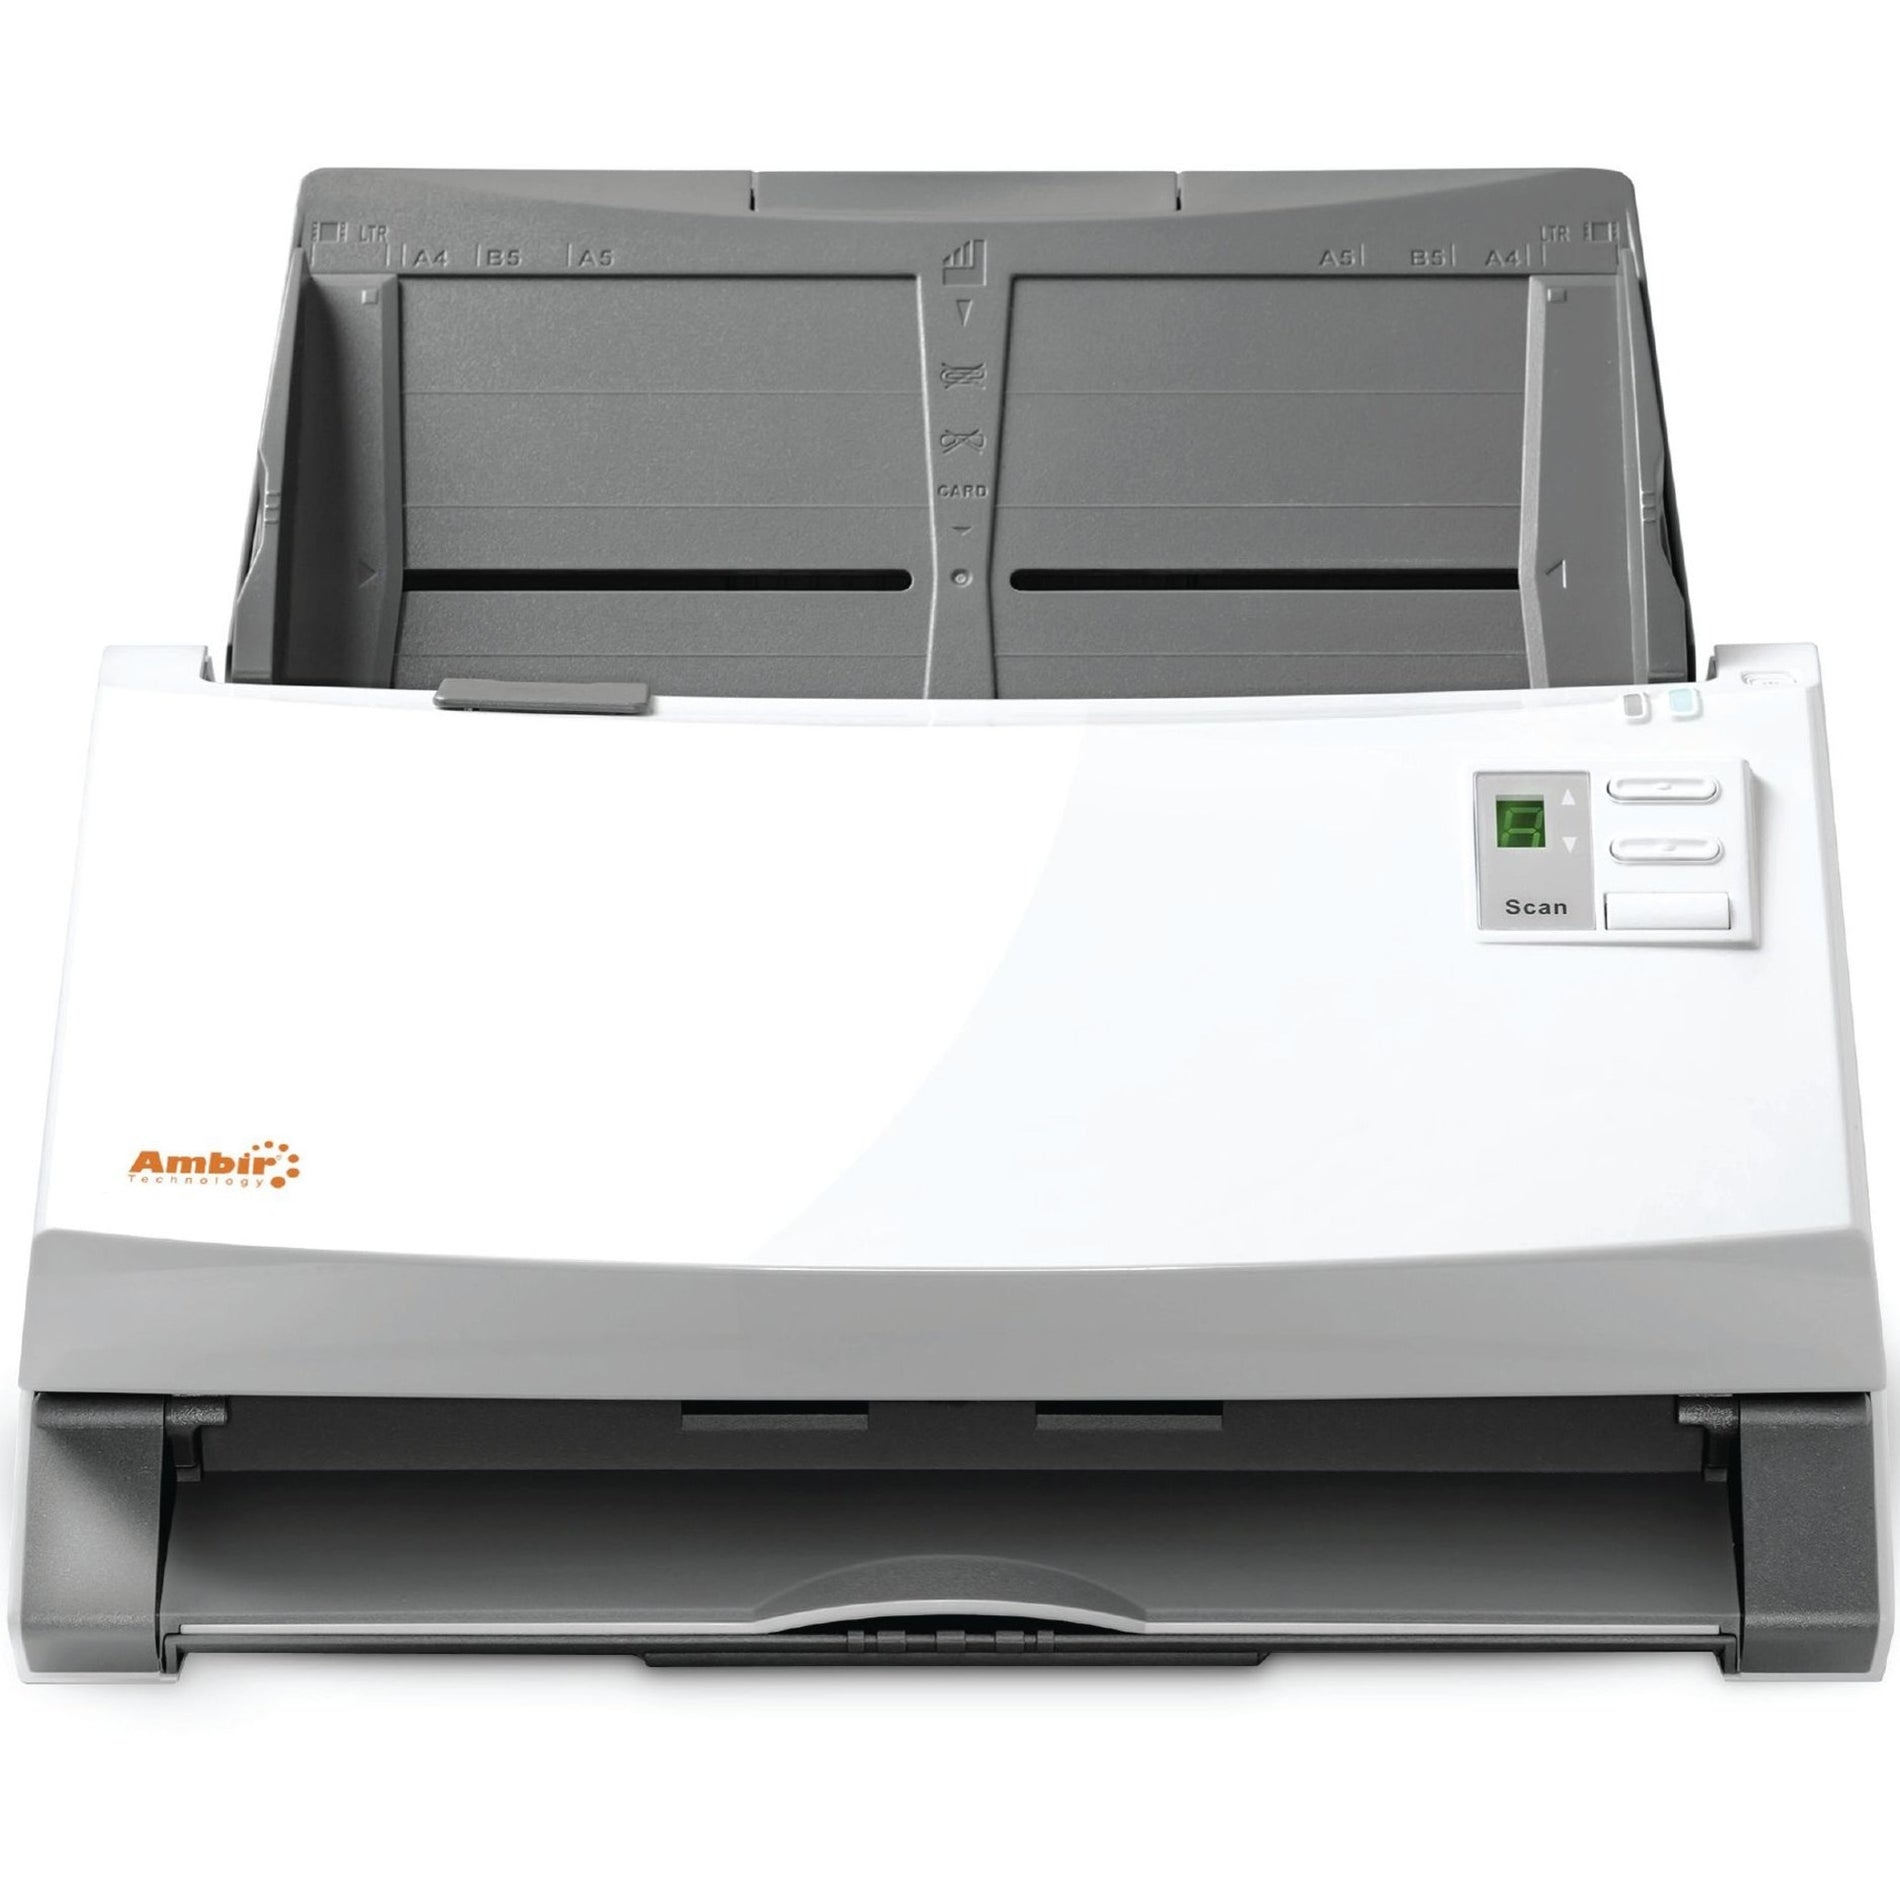 Ambir DS340-ATH ImageScan Pro 340u Sheetfed Scanner with AmbirScan for athenahealth